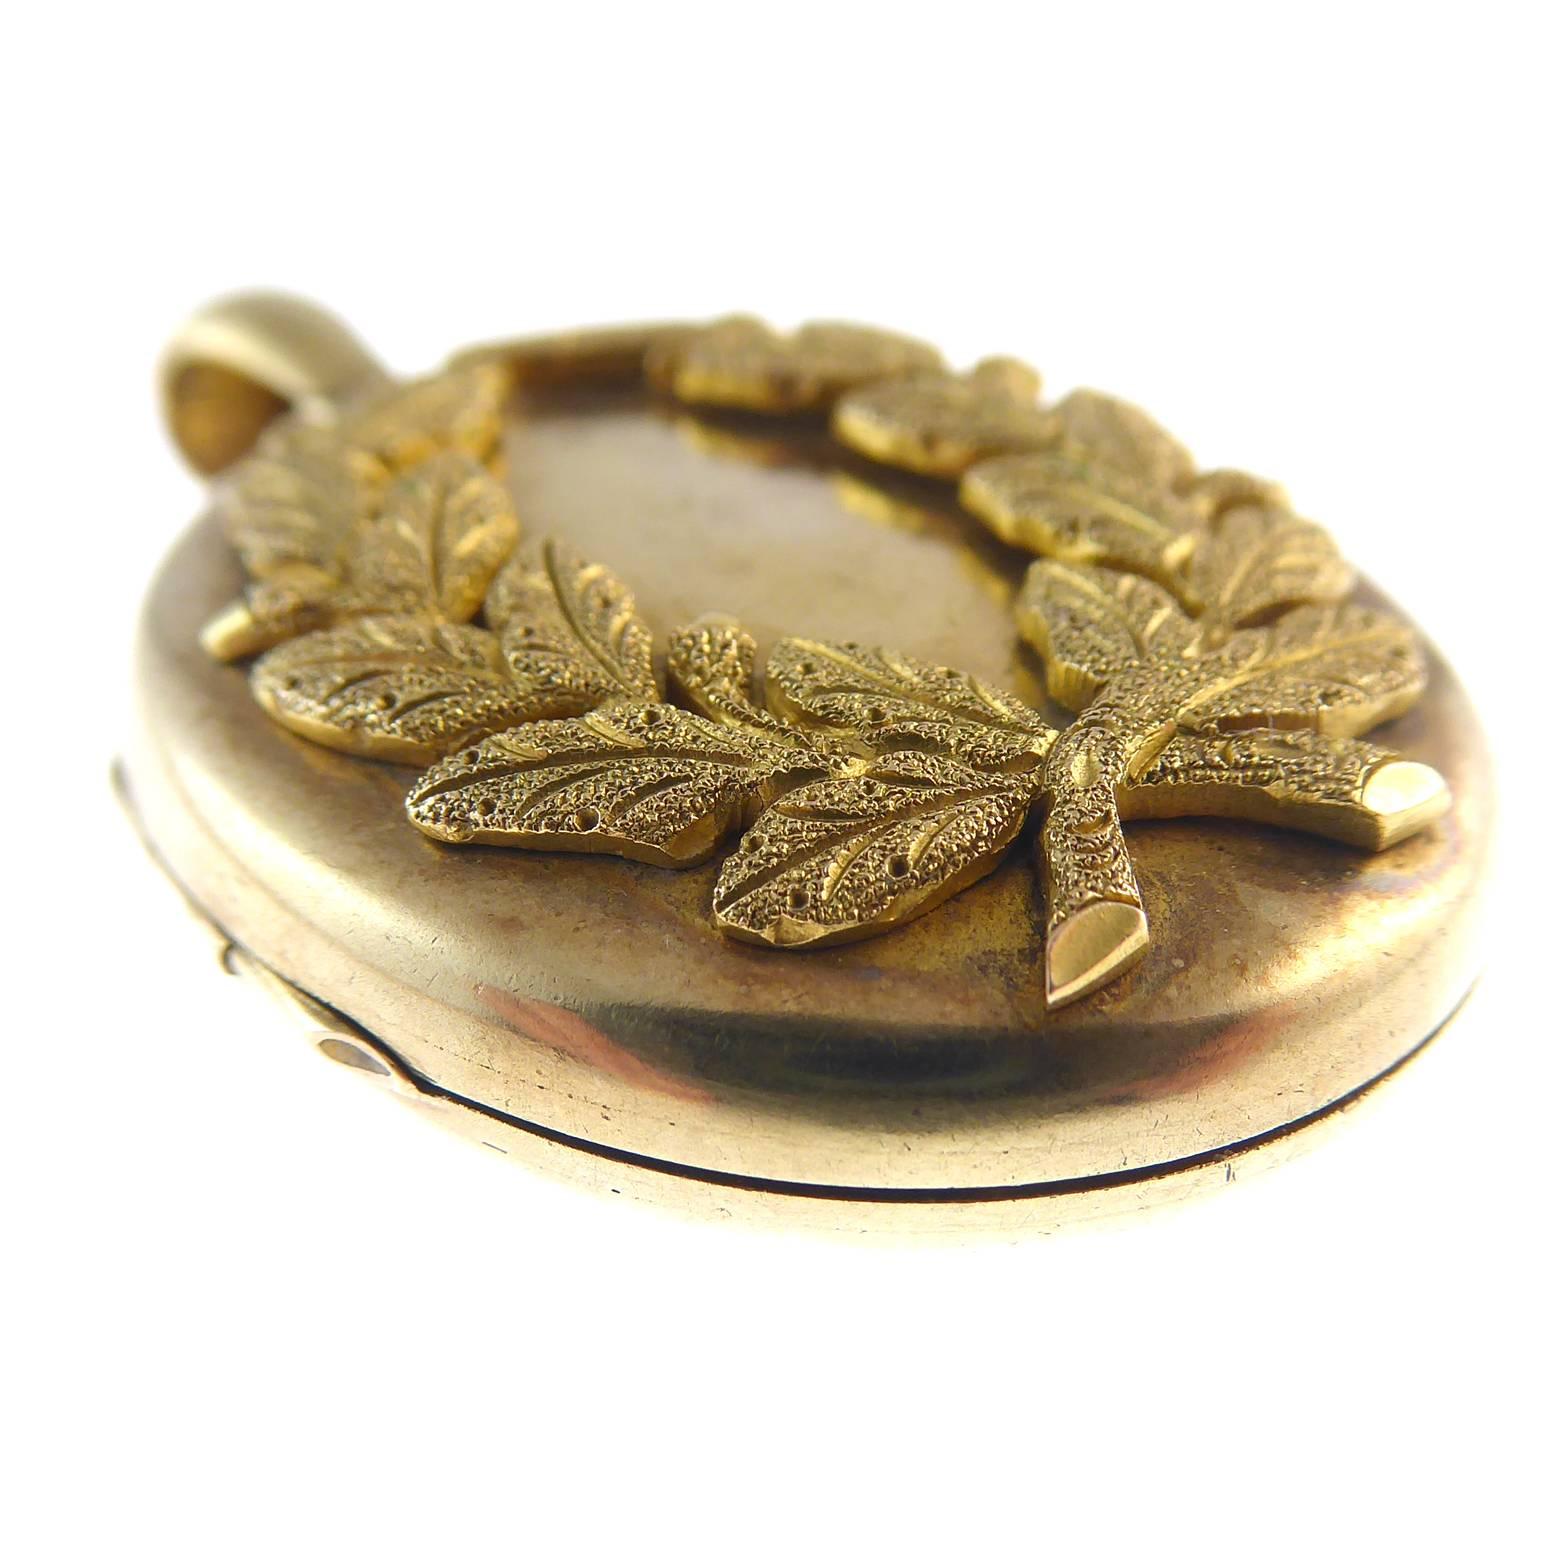 An oval hinged locket measuring approx. 28mm x 35mm with applied engraved wreath shaped panel and a plain polished back.  The front depicts a wreath of acorns and oak leaves with a beautifully burnished gold colour.  The locket display and overall